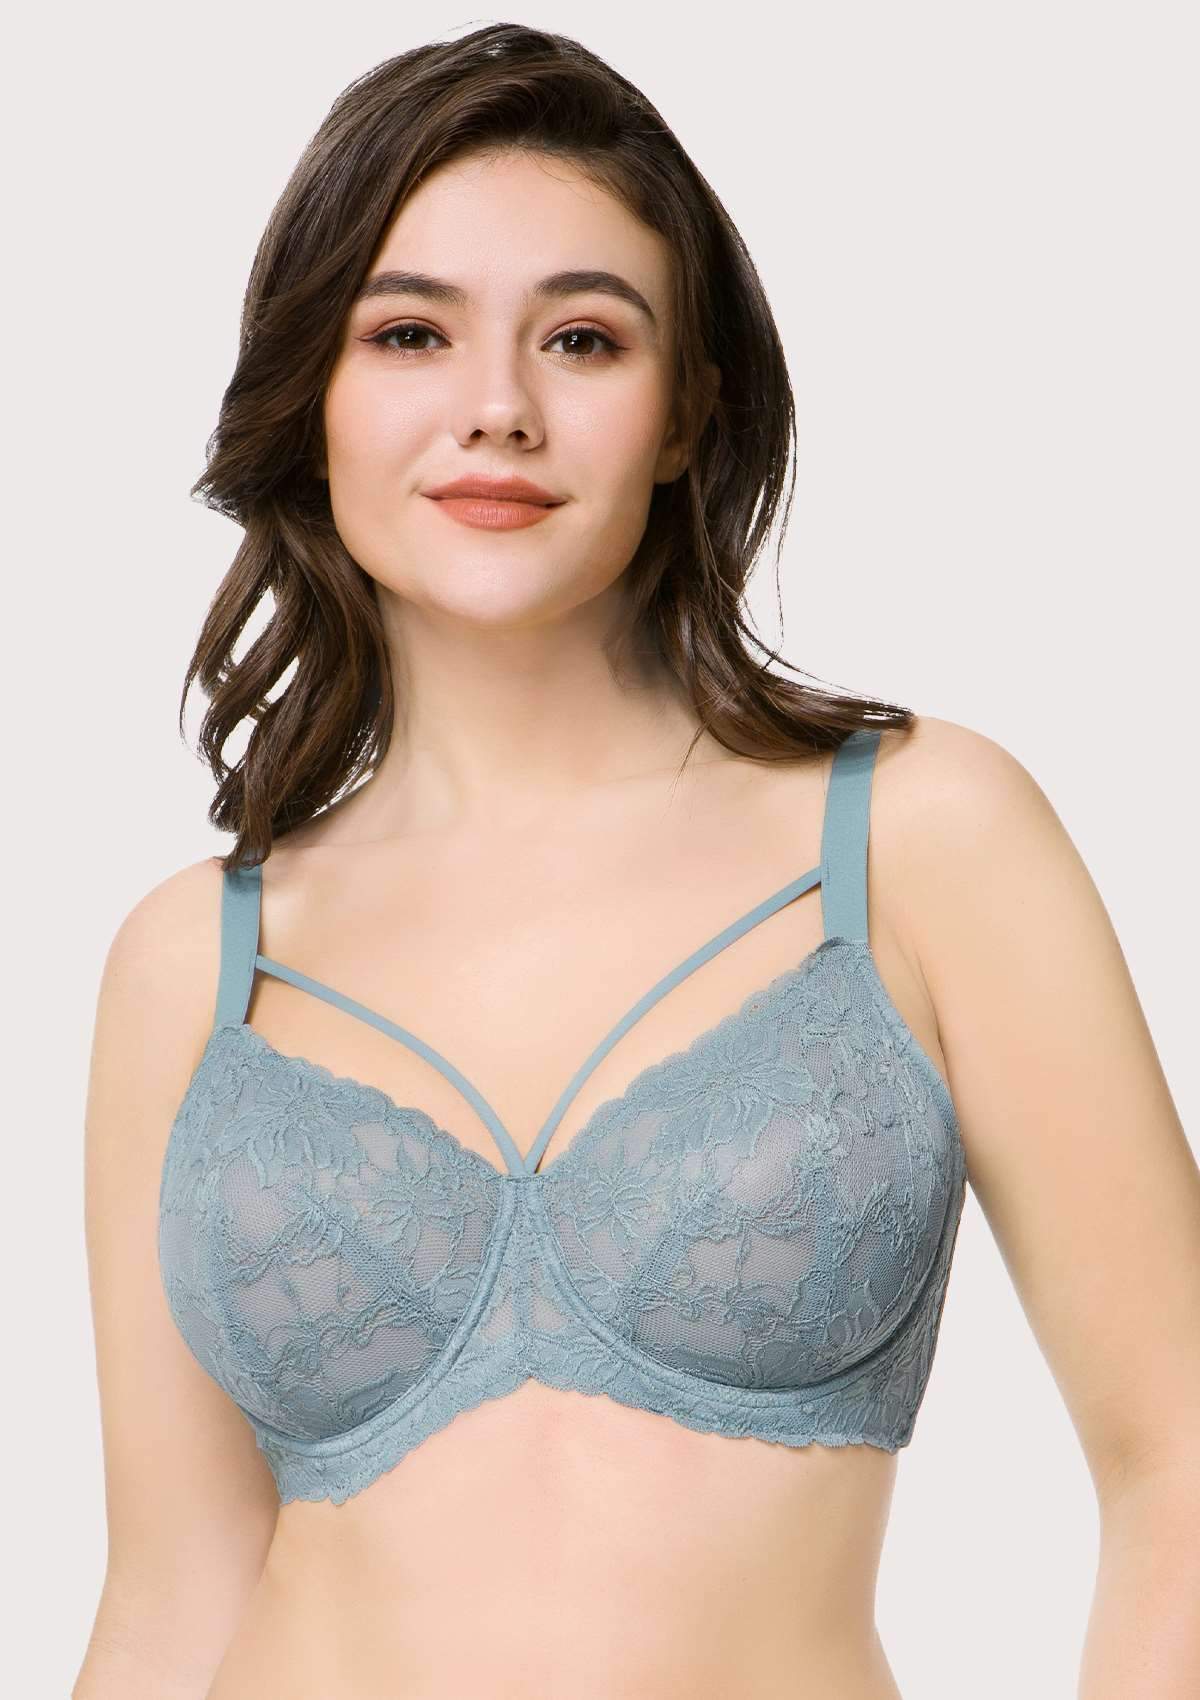 HSIA Pretty In Petals Unlined Lace Bra: Comfortable And Supportive Bra - Pewter Blue / 42 / DDD/F